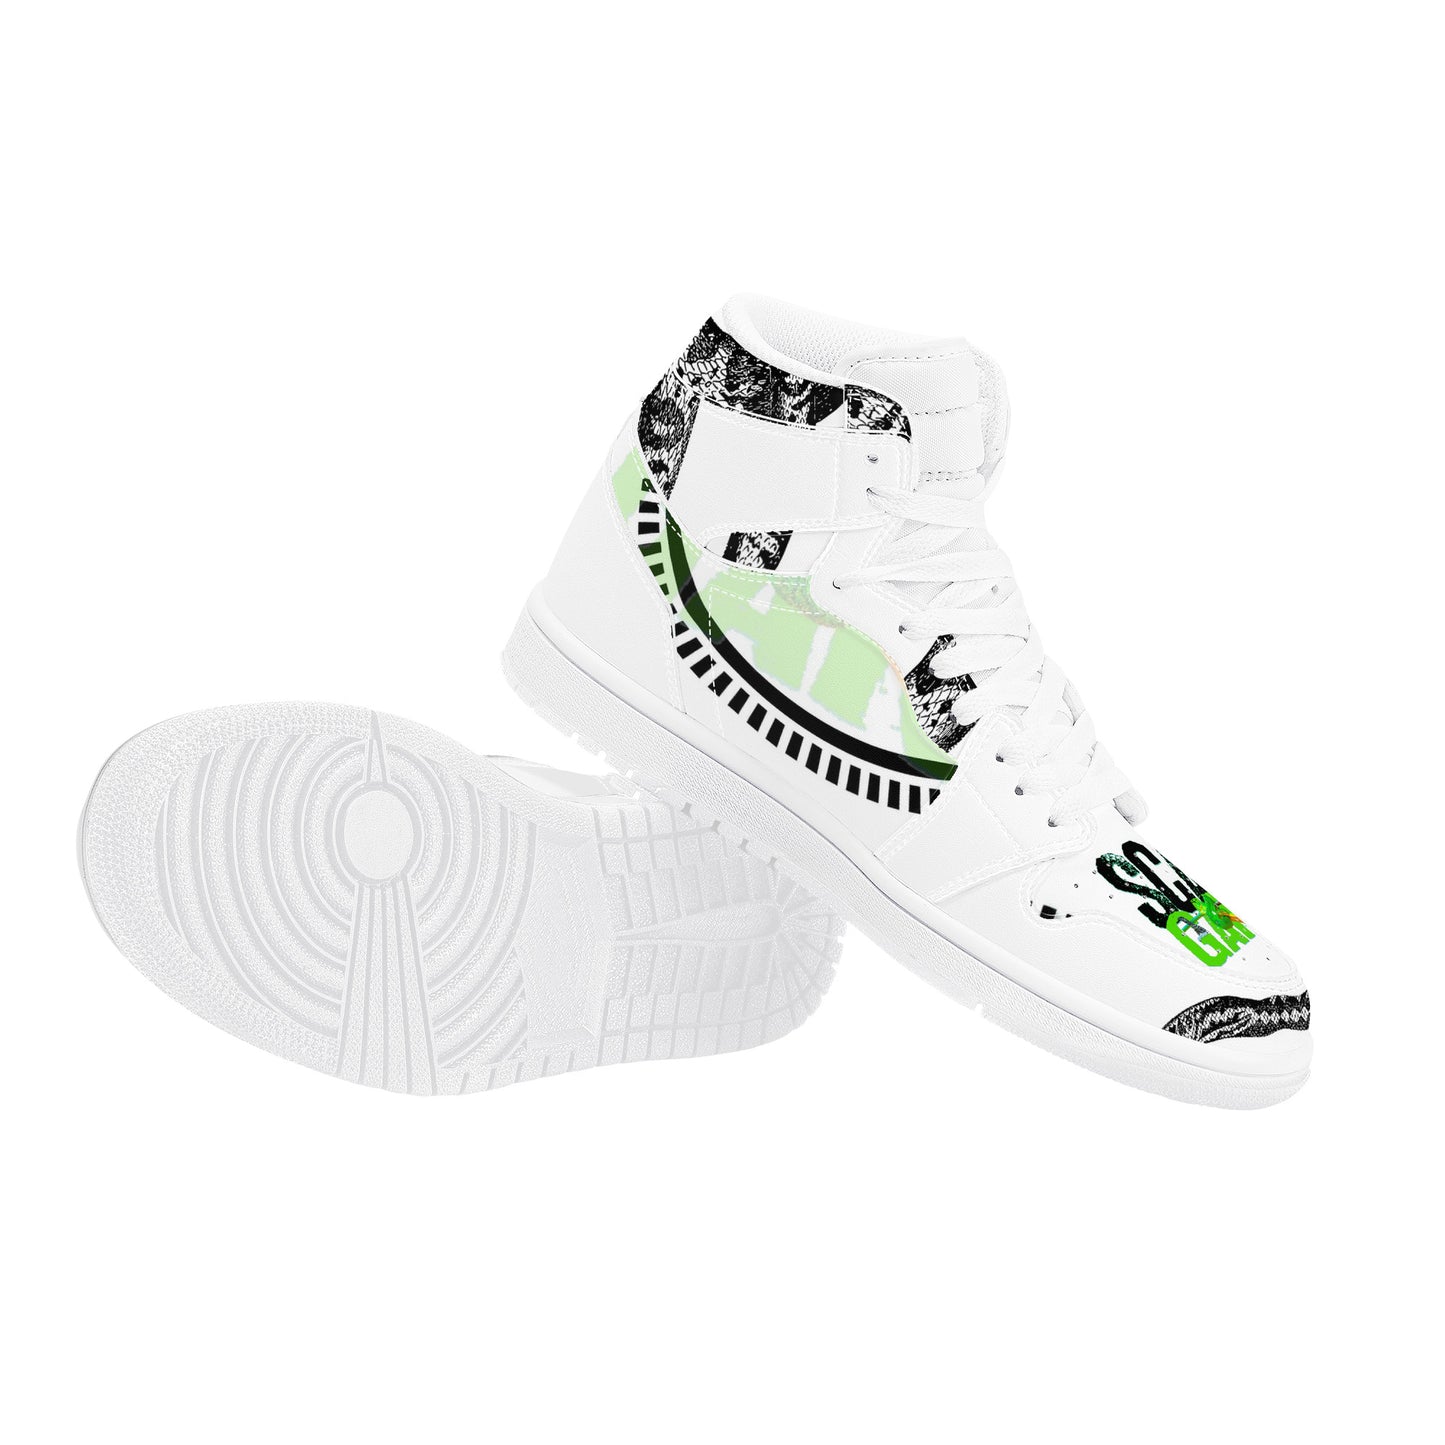 SCALE GANG High Top (White)